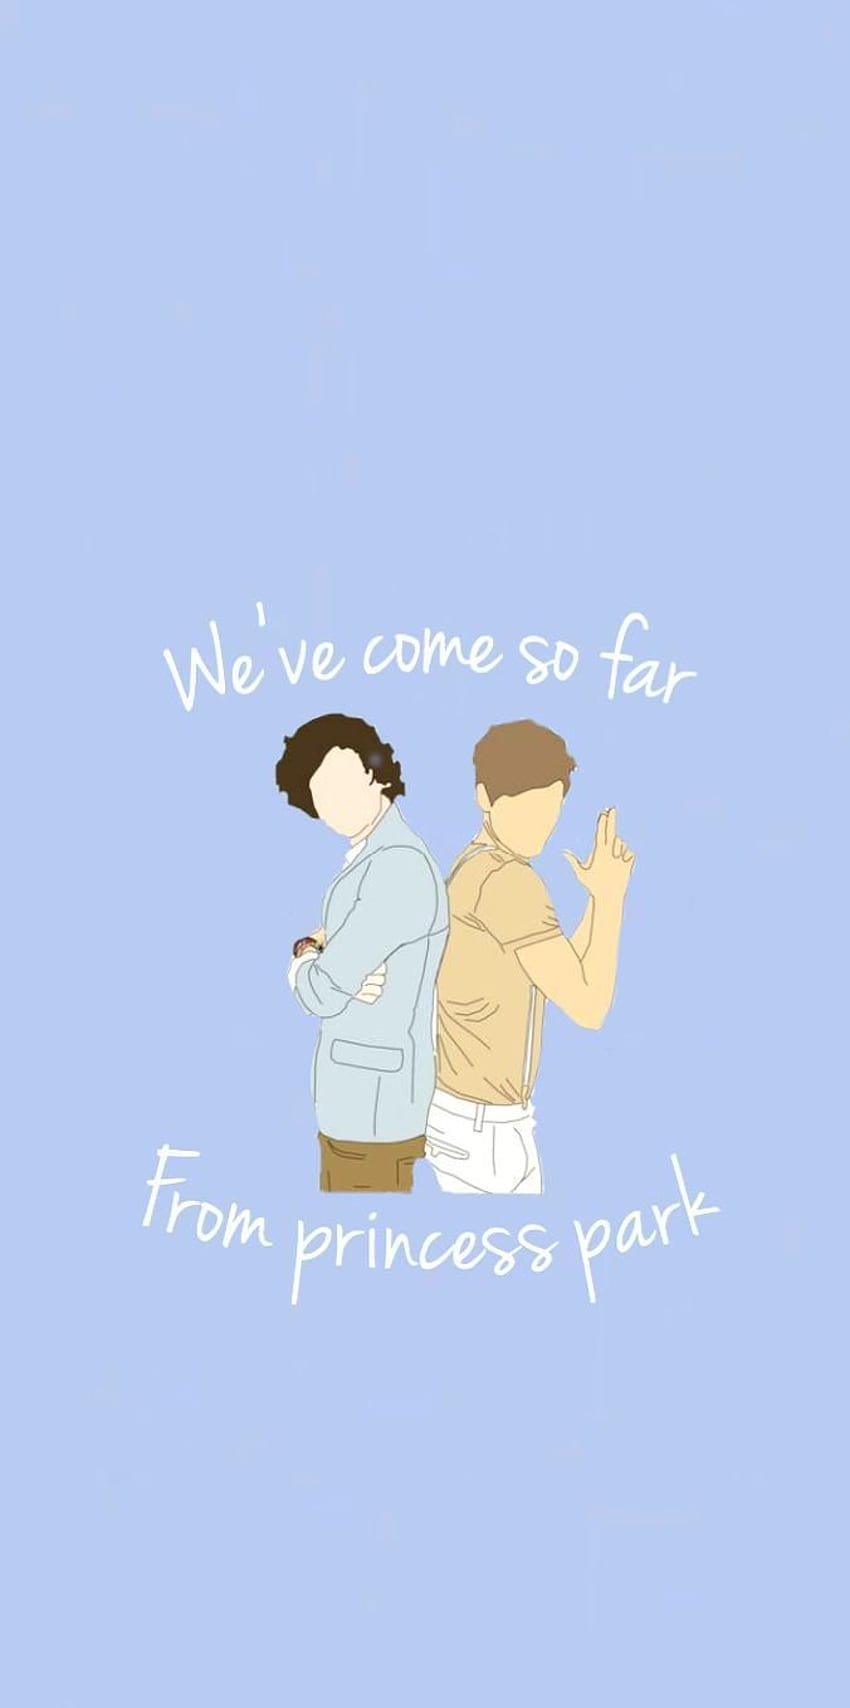 Larry Stylinson Larry one direction Louis Tomlinson Habit in 2020. One direction drawings, Princess parking, One direction art HD phone wallpaper